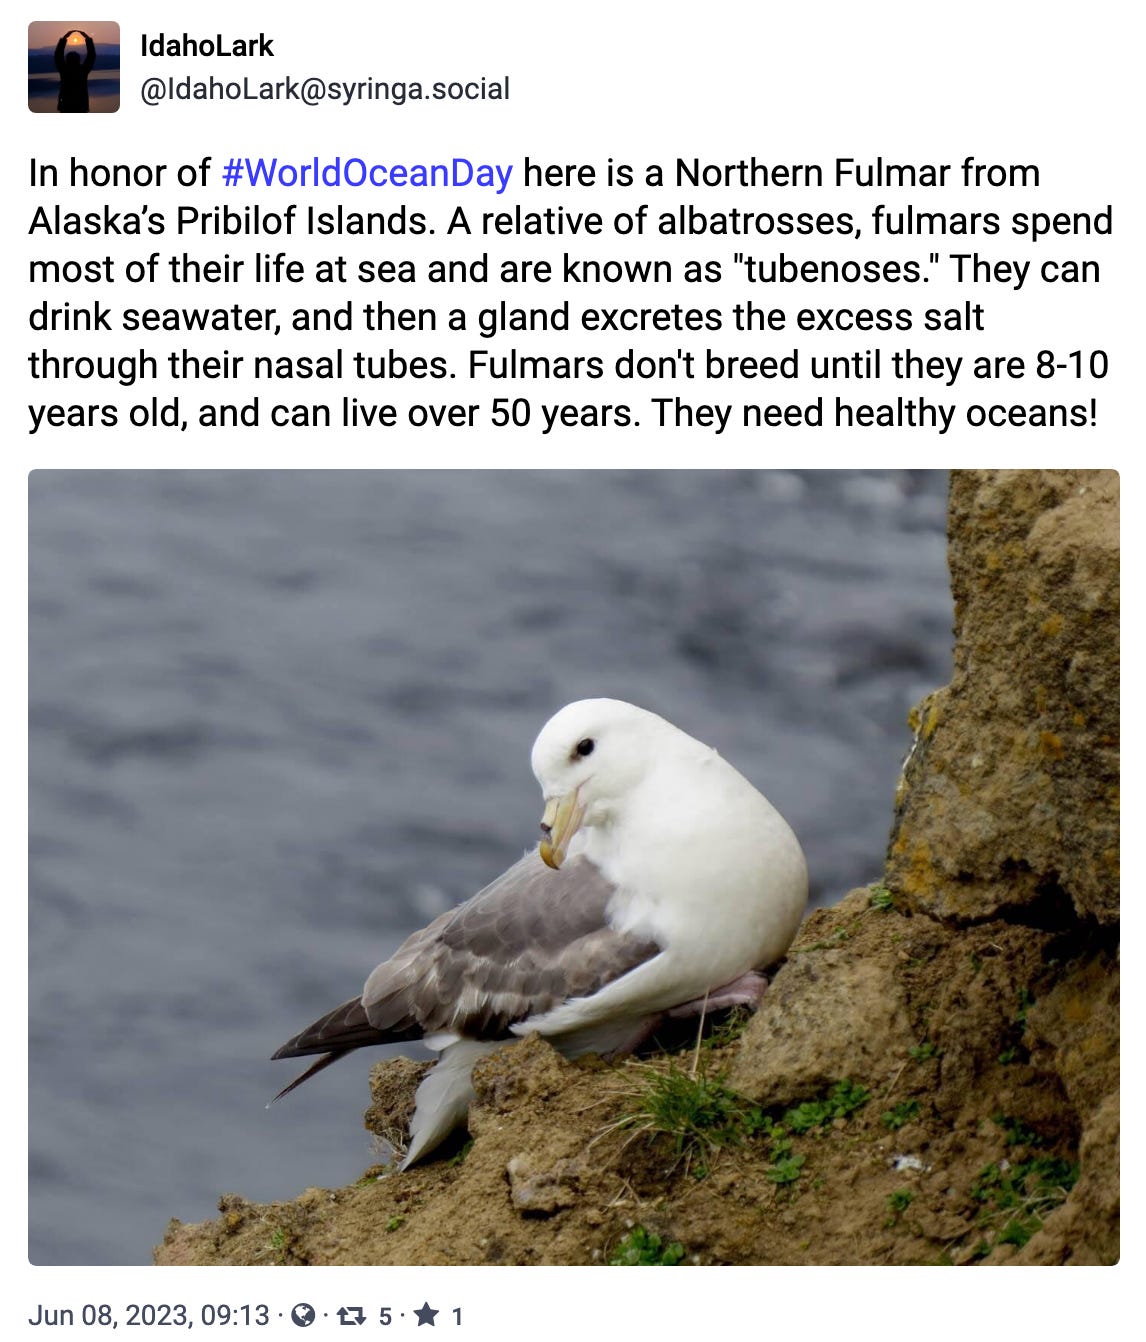 In honor of #WorldOceanDay here is a Northern Fulmar from Alaska’s Pribilof Islands.